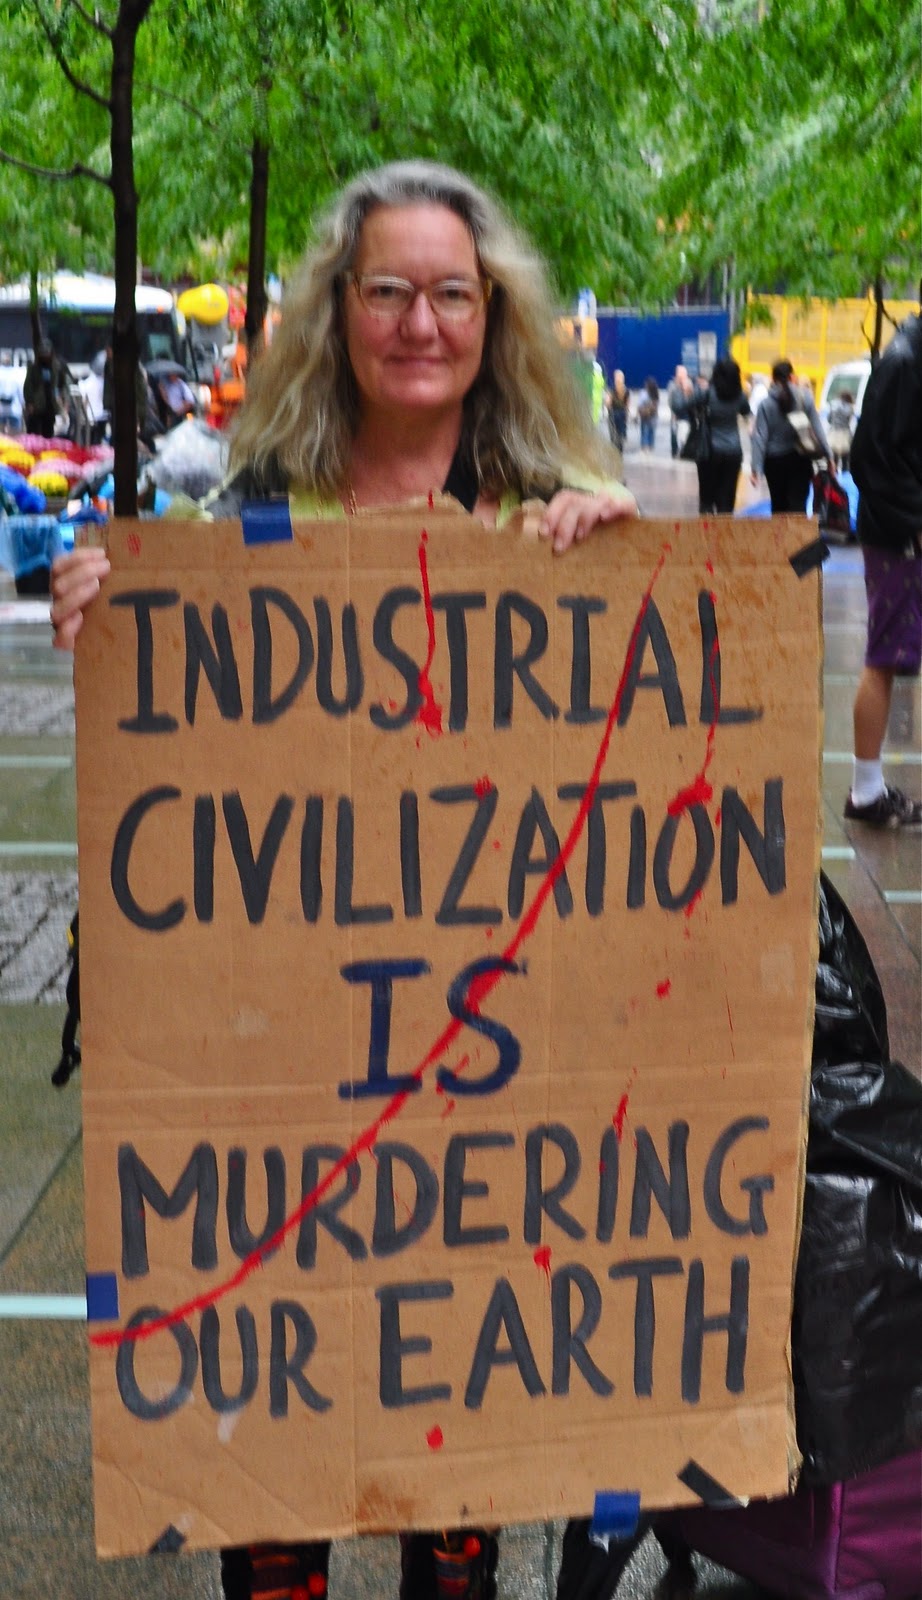 Gail Zawacki at the Occupy Wall Street protest in New York City, 23 September 2011. She carries a sign that reads, “Industrial civilization is murdering our Earth”. Photo: Gail Zawacki